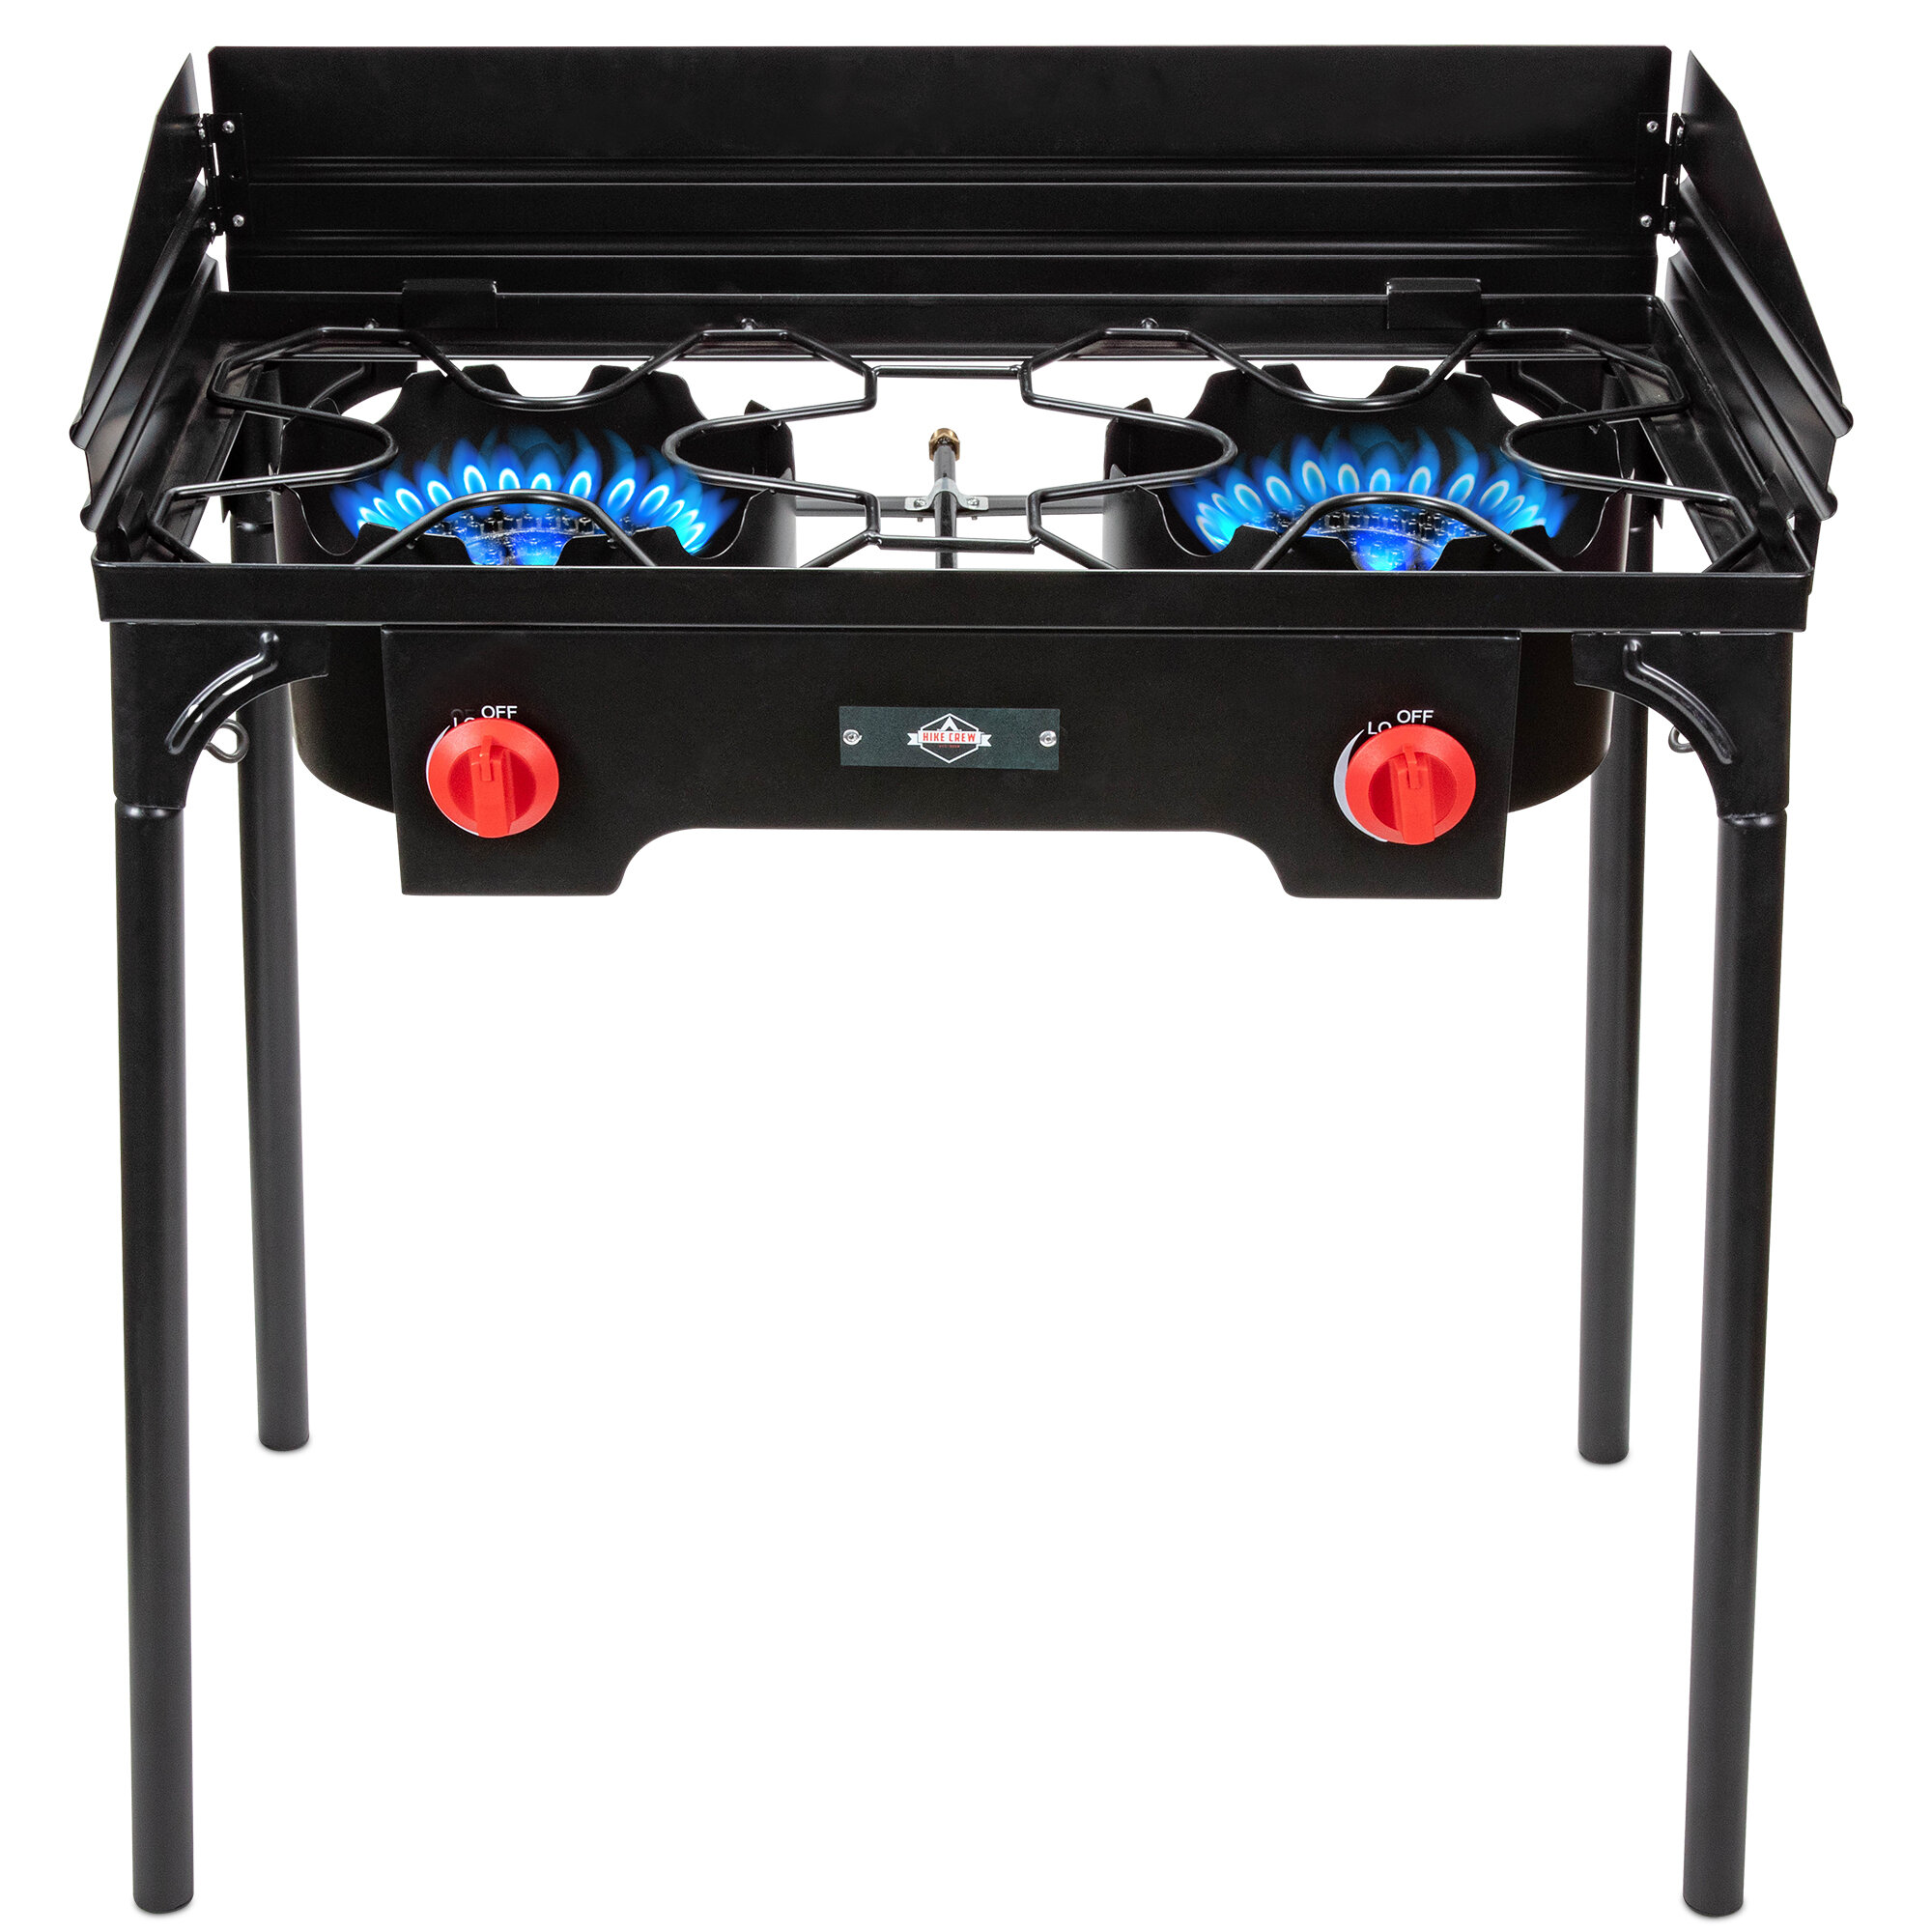 Cooking Stove Outdoor Burner, Outdoor Stove 6 Burners